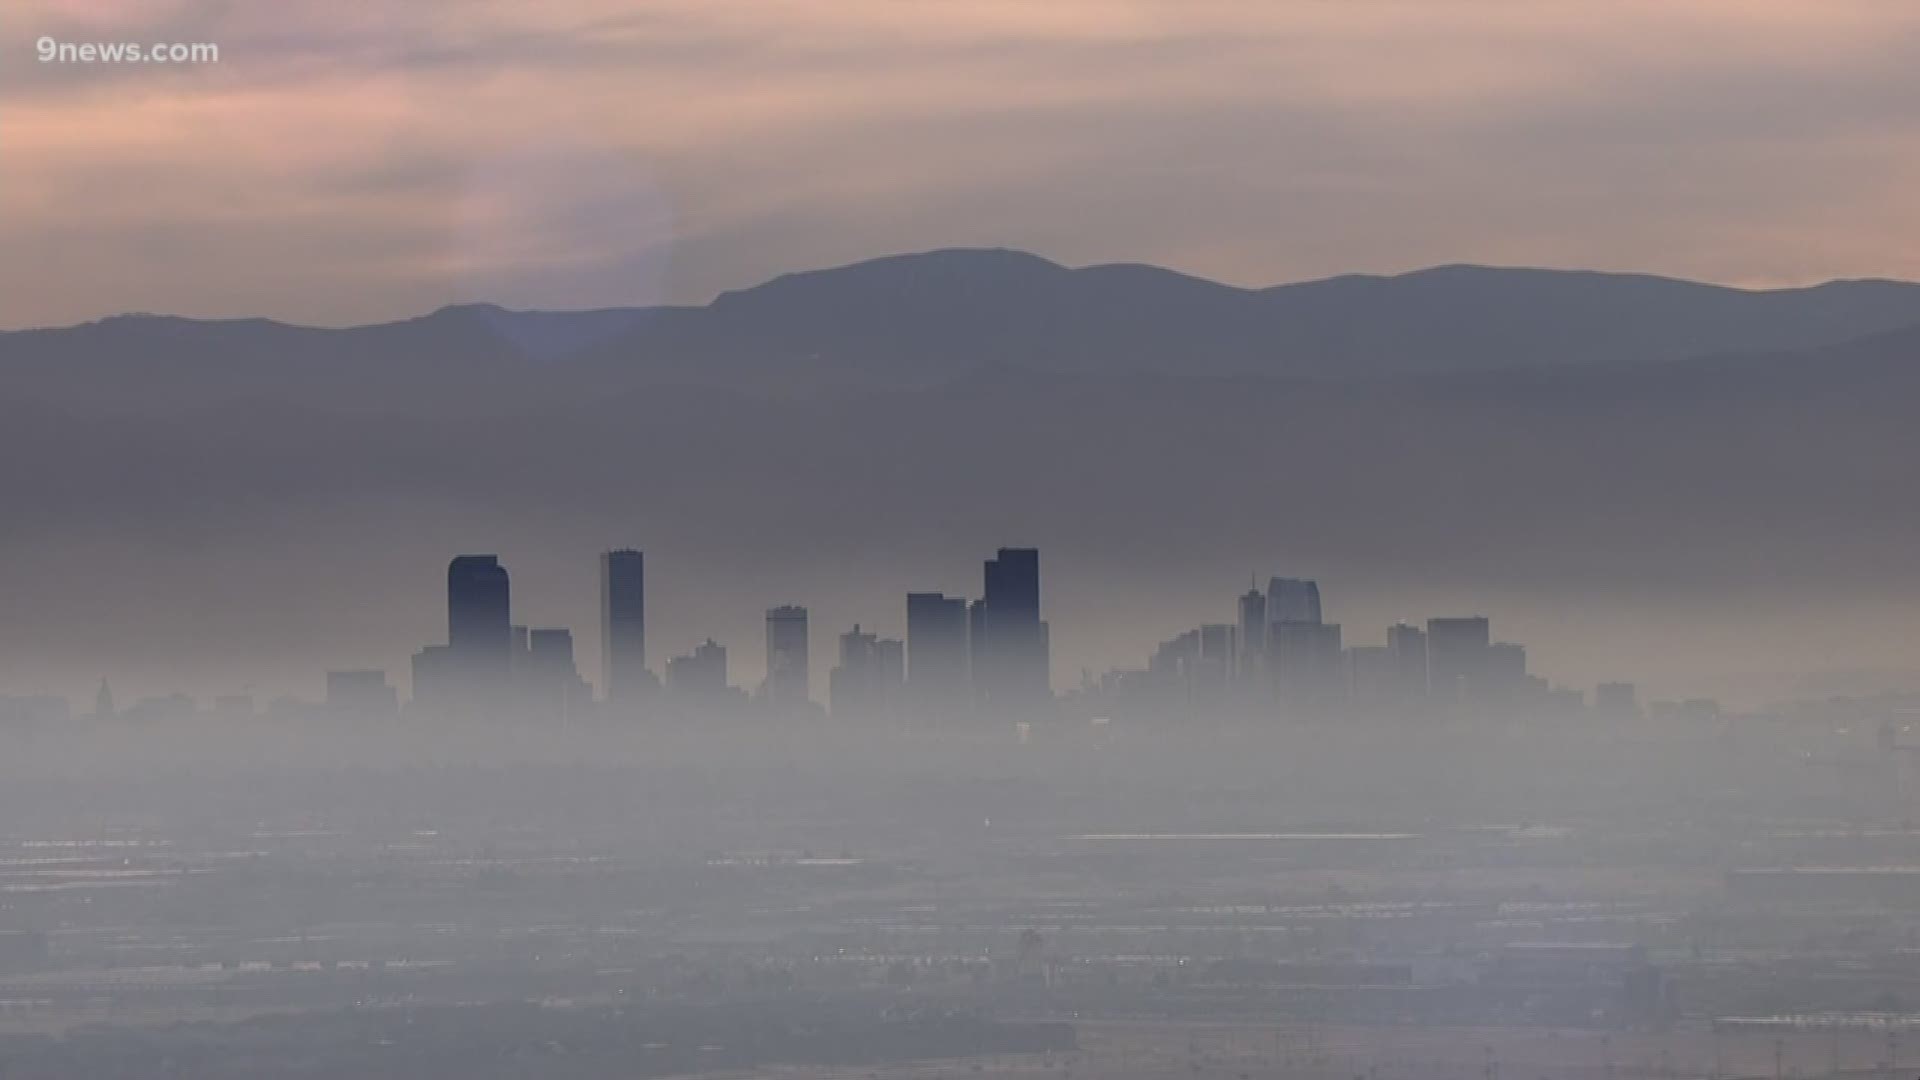 The Front Range of Colorado has not been able to meet what the Environmental Protection Agency calls a safe level of ozone pollution since 2004.